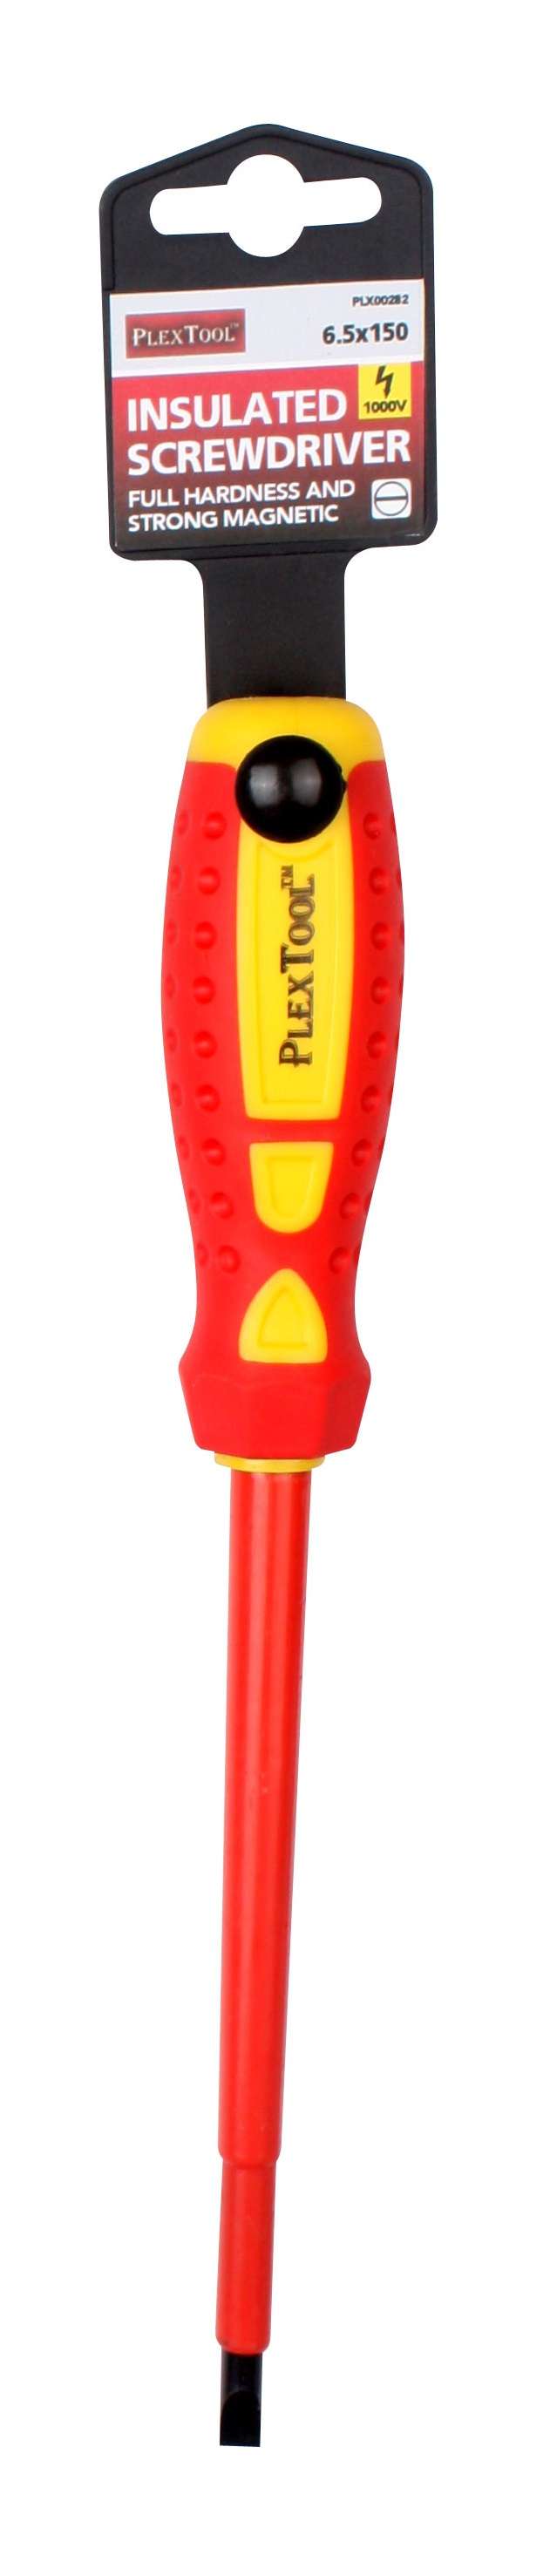 6"L x 1/4" Slotted Full Hardness Strong Magnetic Insulated Screwdriver - 1